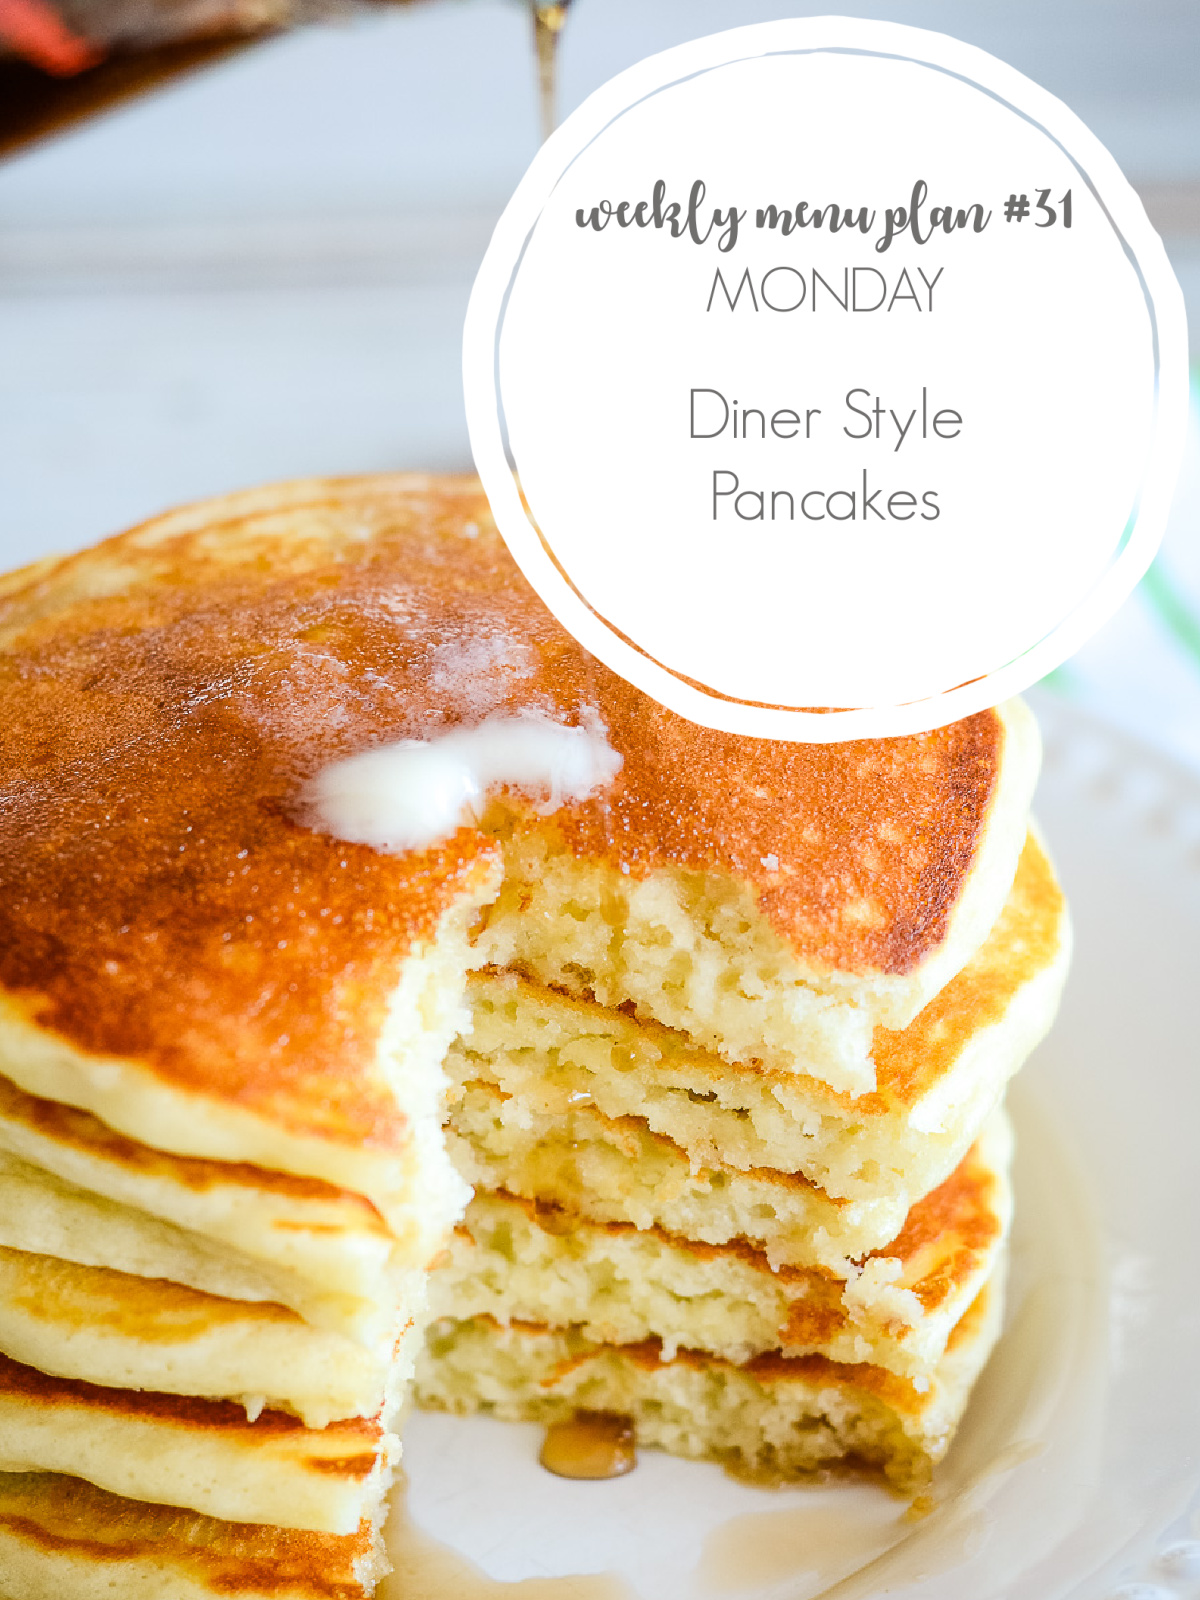 diner style pancakes